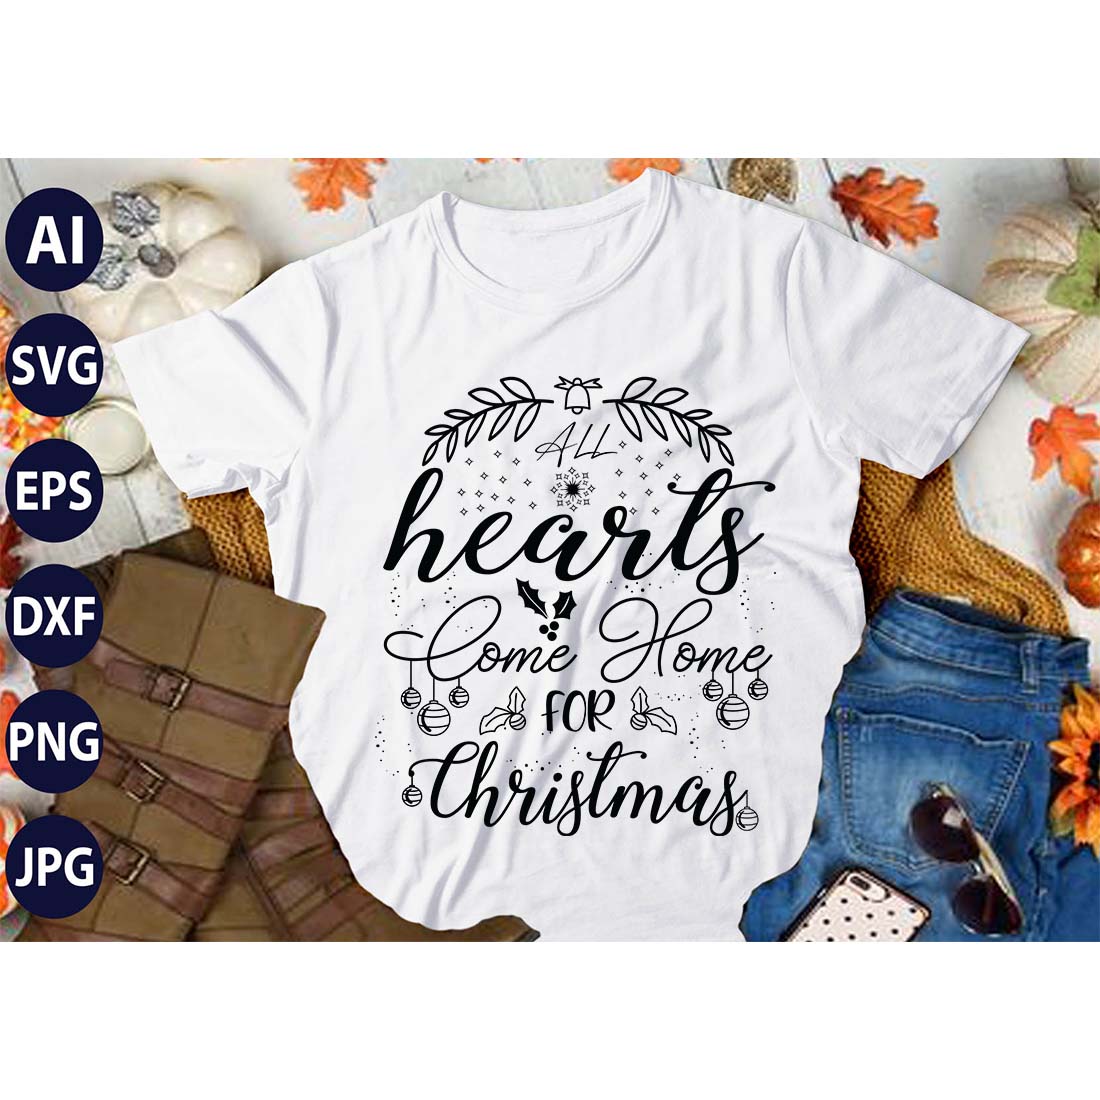 All Hearts Come Home For Christmas, SVG T-Shirt Design |Christmas Retro It's All About Jesus Typography Tshirt Design | Ai, Svg, Eps, Dxf, Jpeg, Png, Instant download T-Shirt | 100% print-ready Digital vector file preview image.